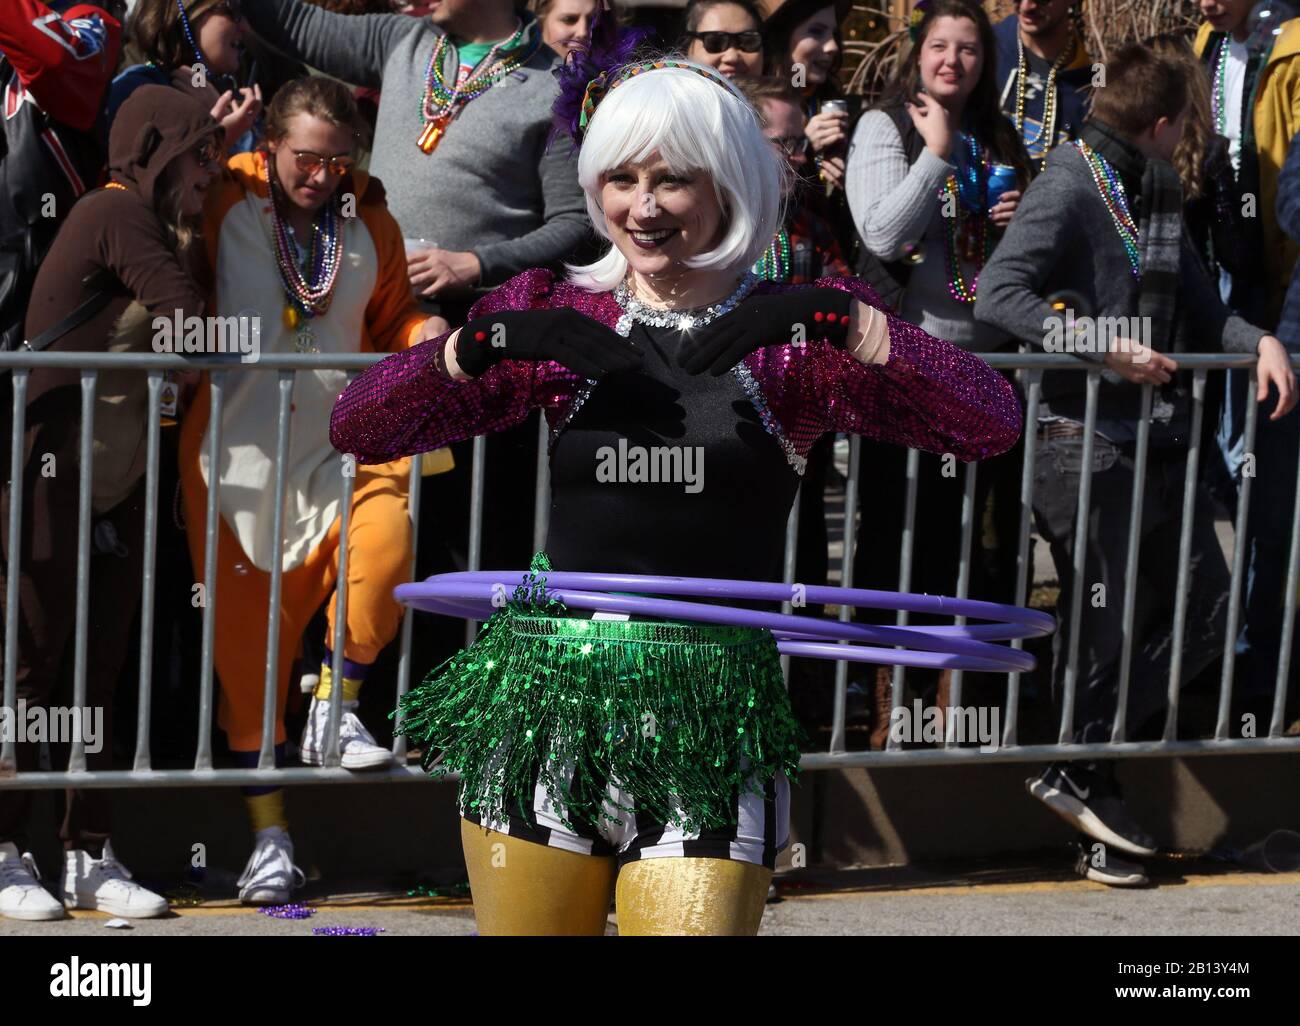 St. Louis, United States. 22nd Feb, 2020. A participant in the St. Louis Mardi Gras Parade, performs with hula hoops in St. Louis on Saturday, February 22, 2020. Photo by Bill Greenblatt/UPI Credit: UPI/Alamy Live News Stock Photo